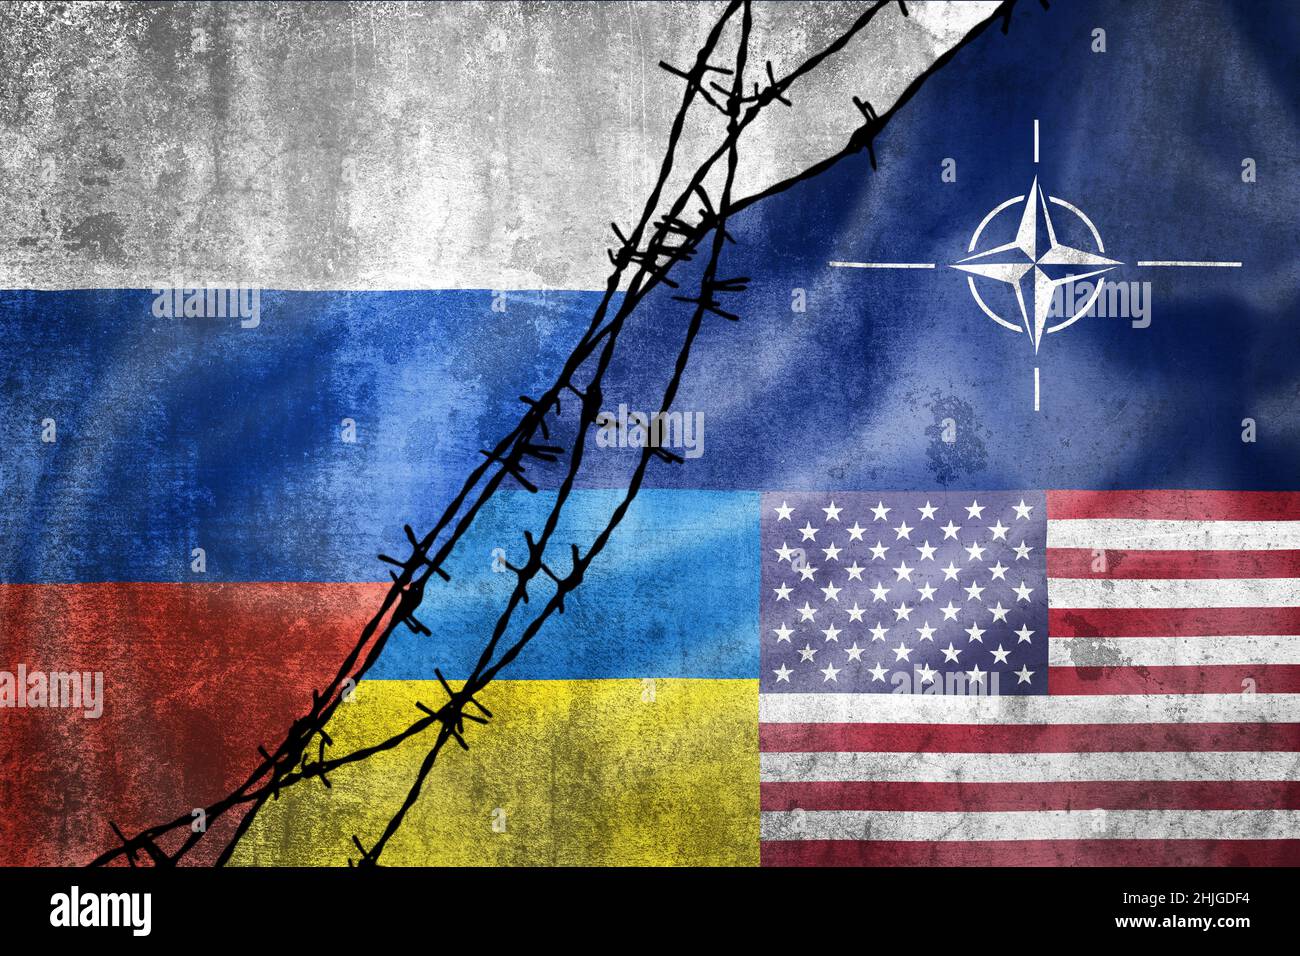 Grunge flags of Russian Federation, NATO, USA and Ukraine divided by barb wire illustration, concept of tense relations between west and Russia Stock Photo